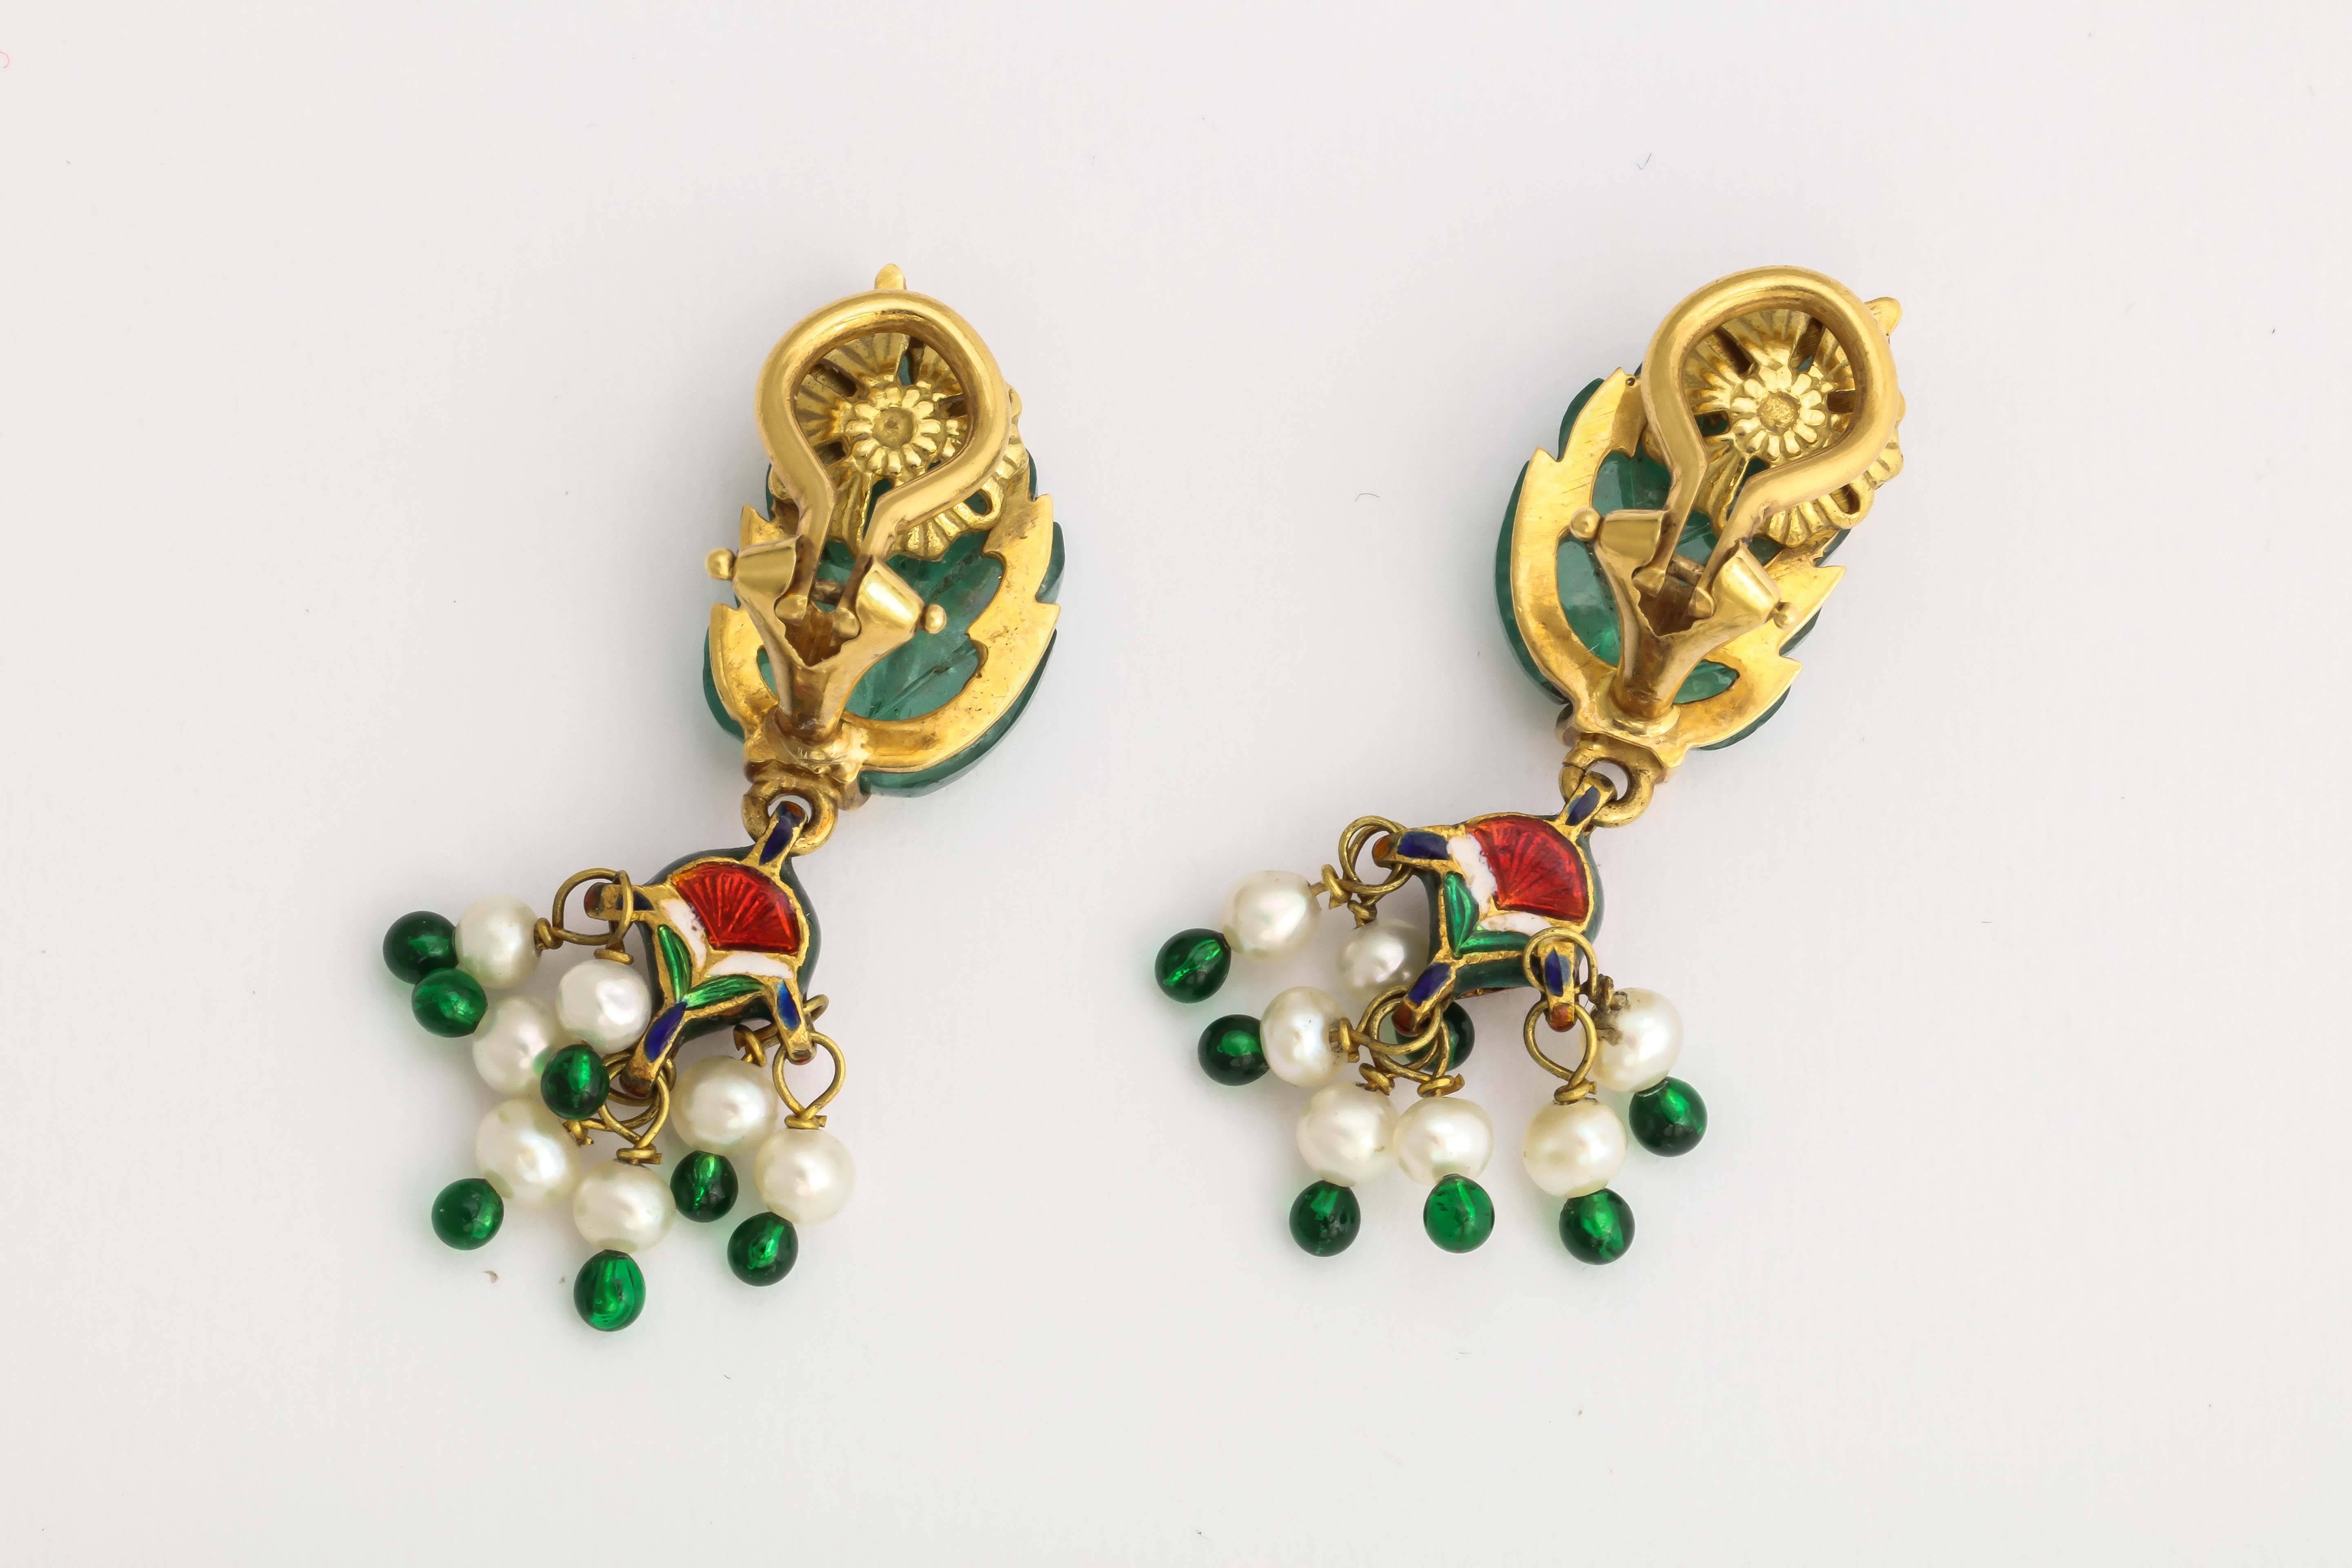 Anglo-Indian Stunning Carved Emerald Enamel Pearl Diamond Gold Clip Earrings